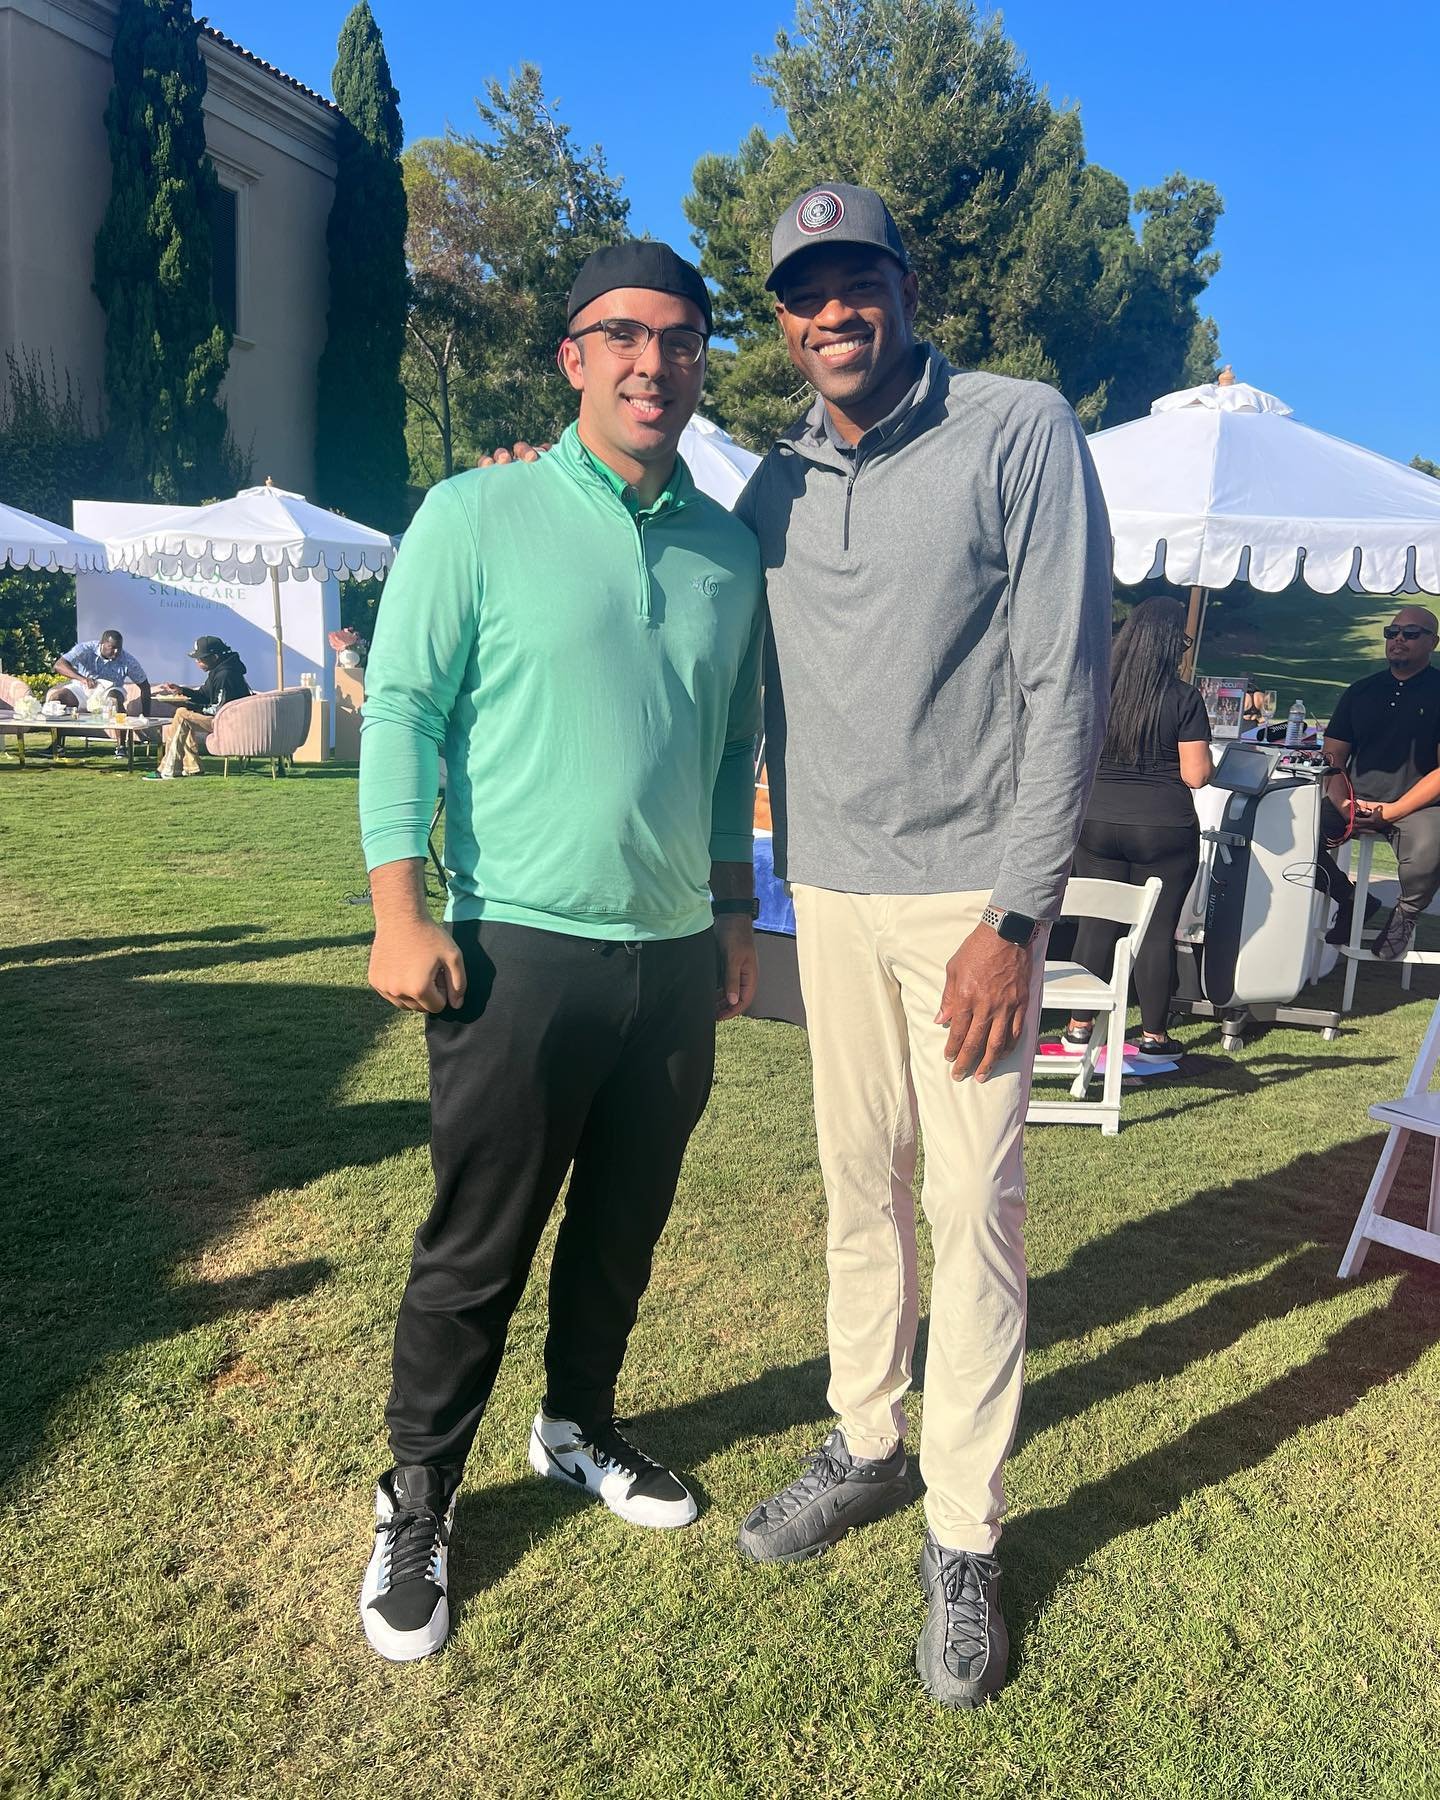 Great time at #PelicanHill yesterday supporting @boxingwagsassociation !!! Had a blast!! 

Got to catch up with family @mrvincecarter !!! So great getting to see you!!! One of my all-time favorites!!! Always a highlight!!!

#HalfManHalfAmazing #Vinsa